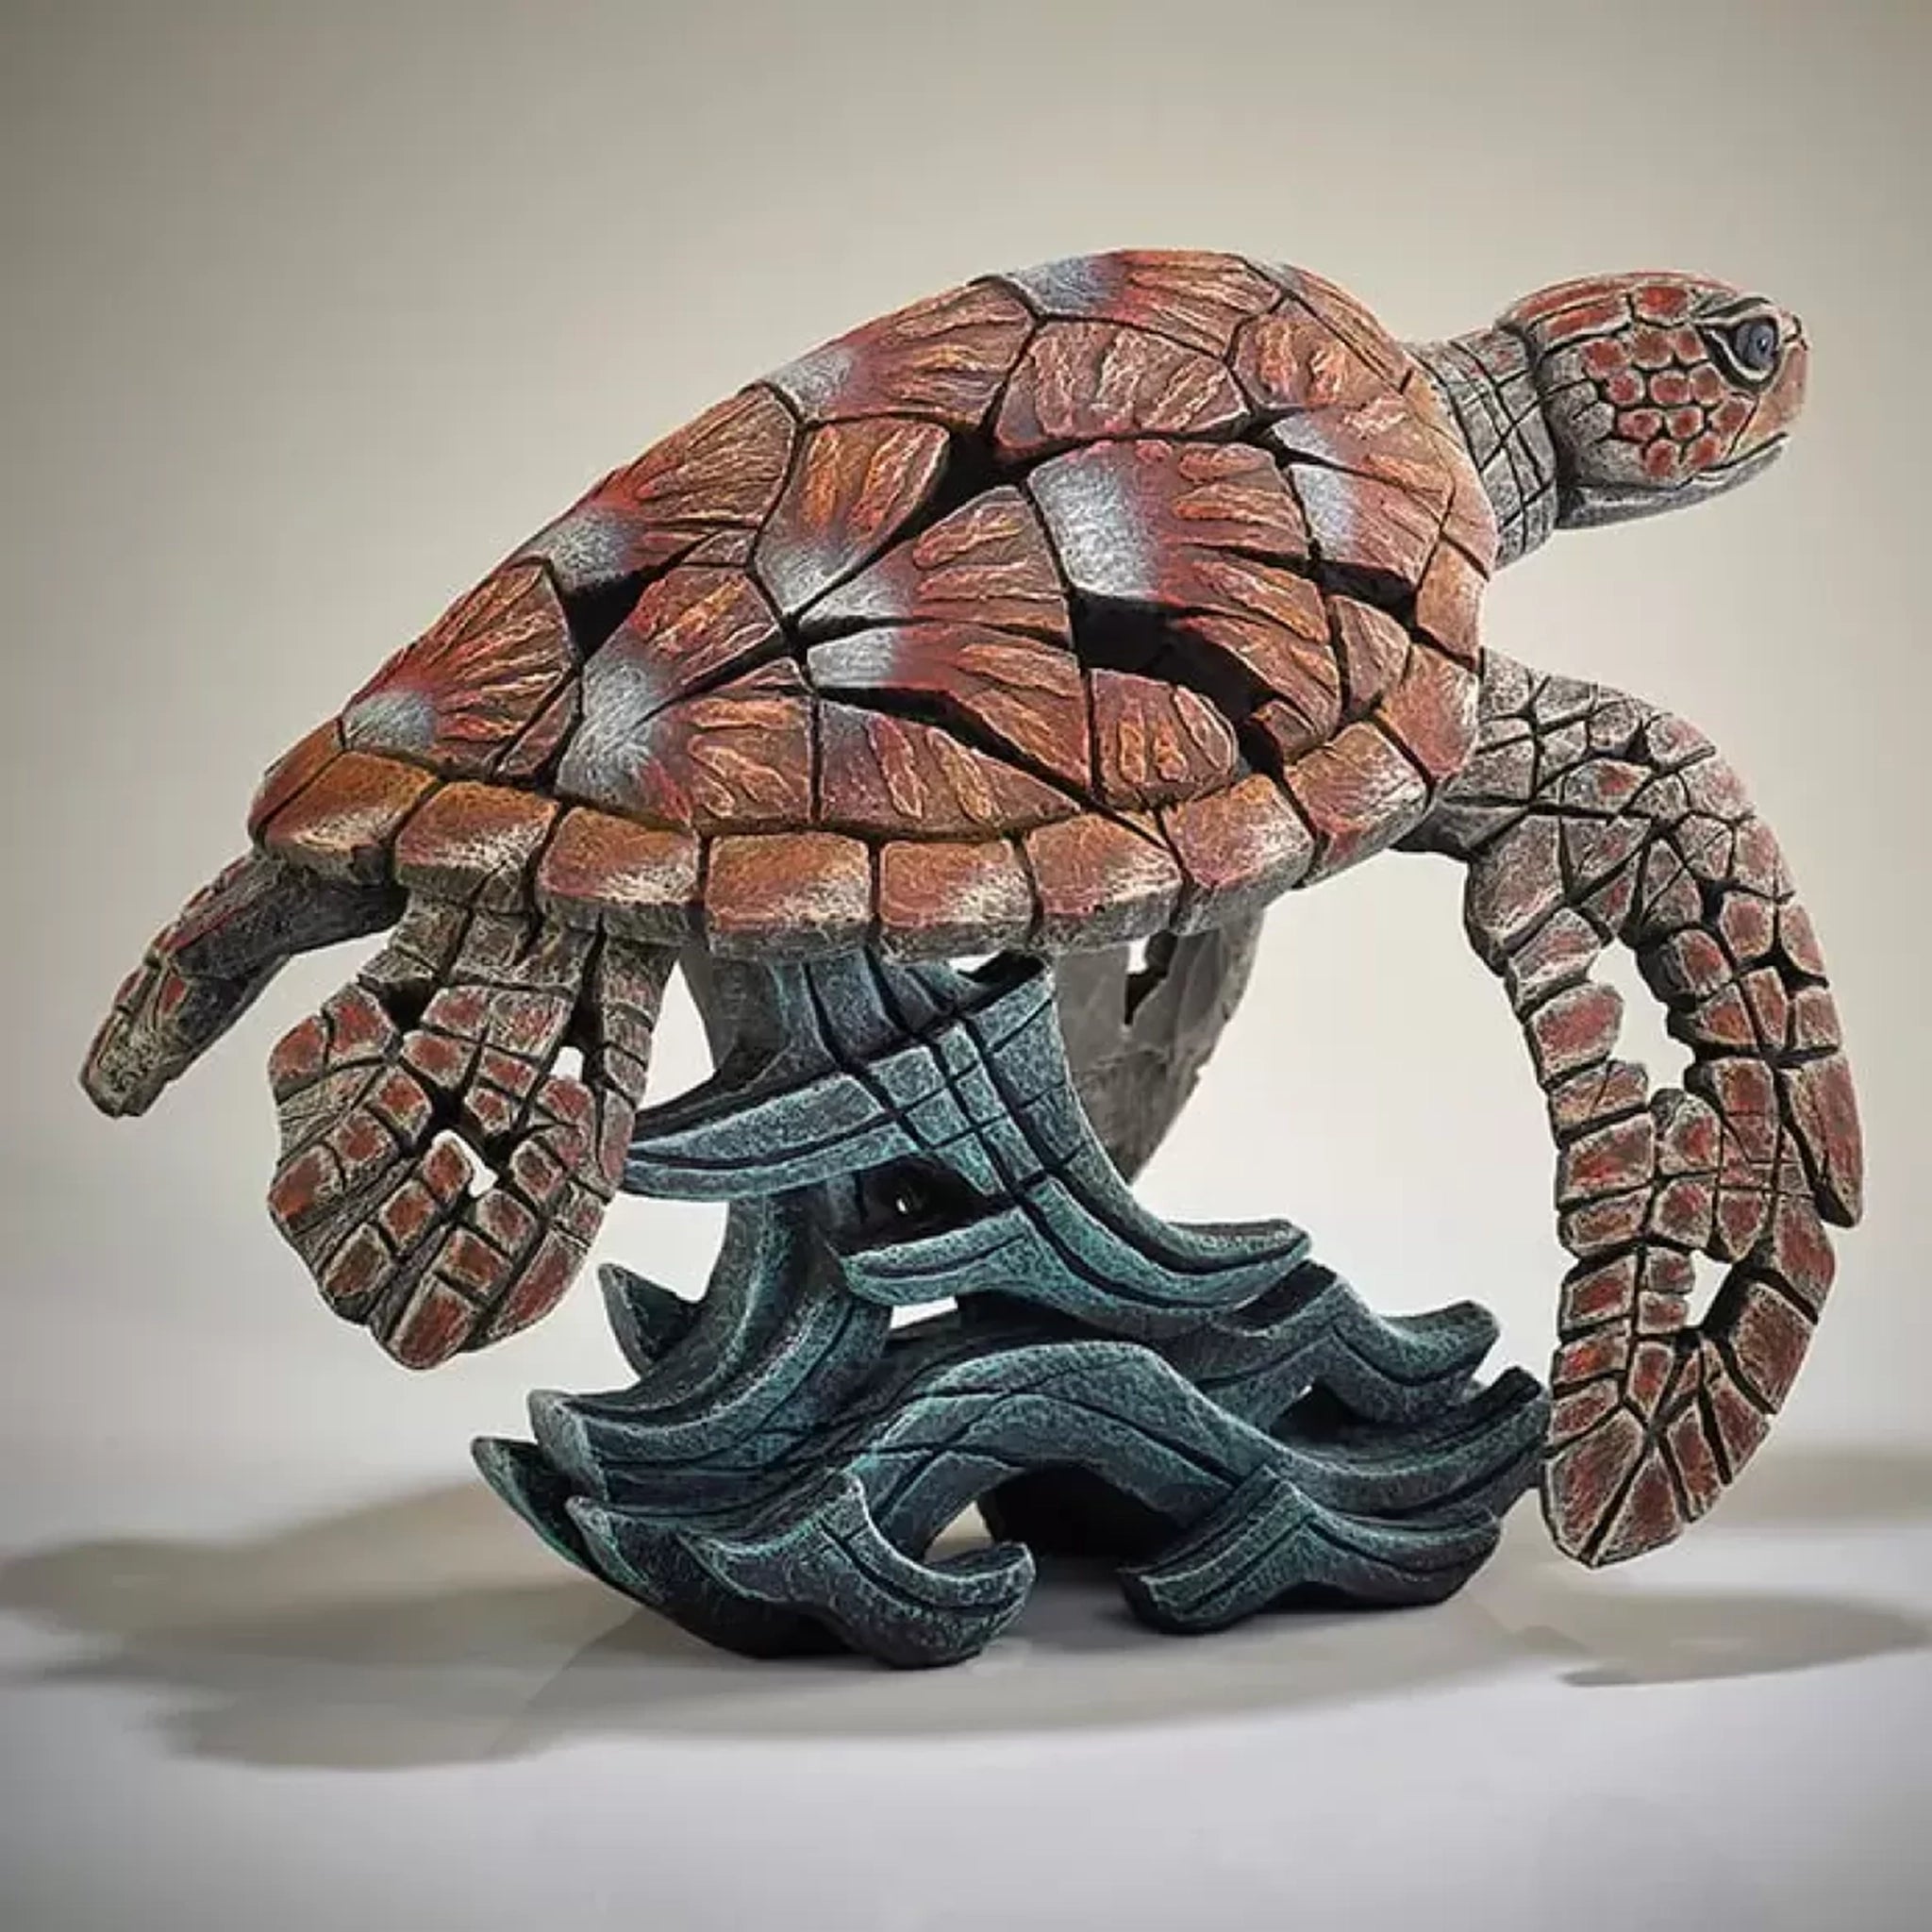 A textured and painted sea turtle surfing waves sculpture from back